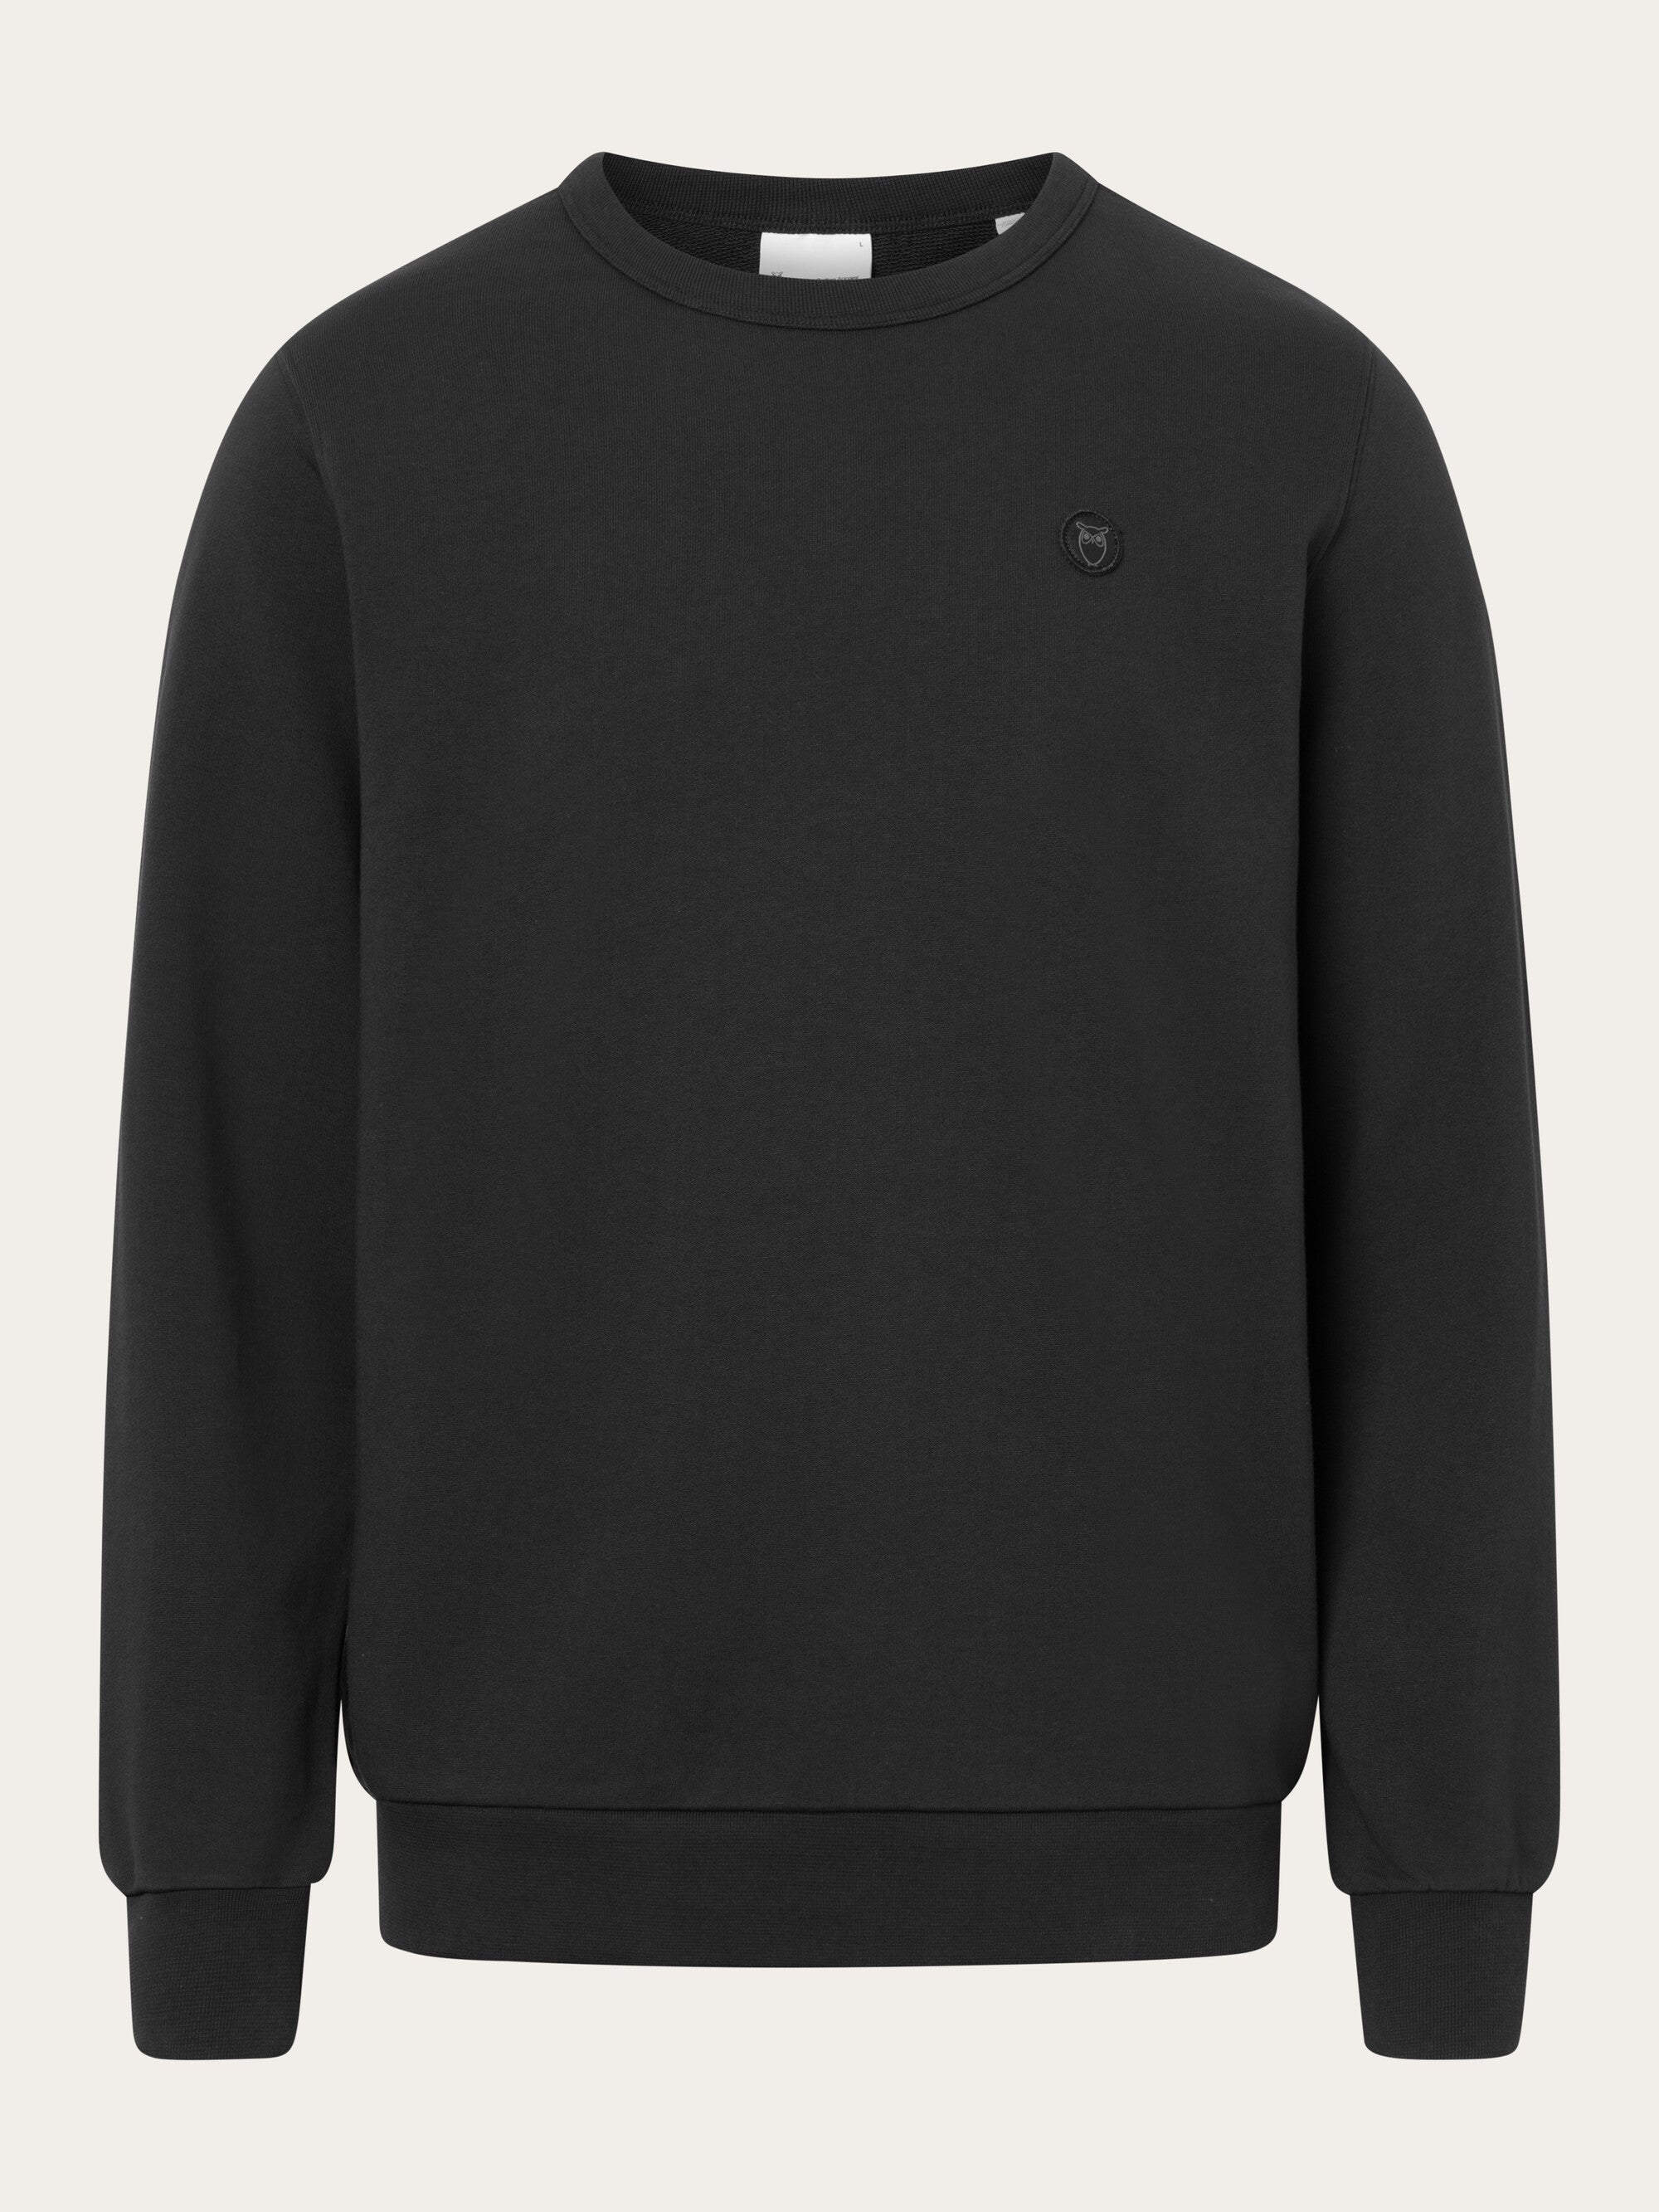 Buy Basic badge sweat - Black - from KnowledgeCotton Jet Apparel®